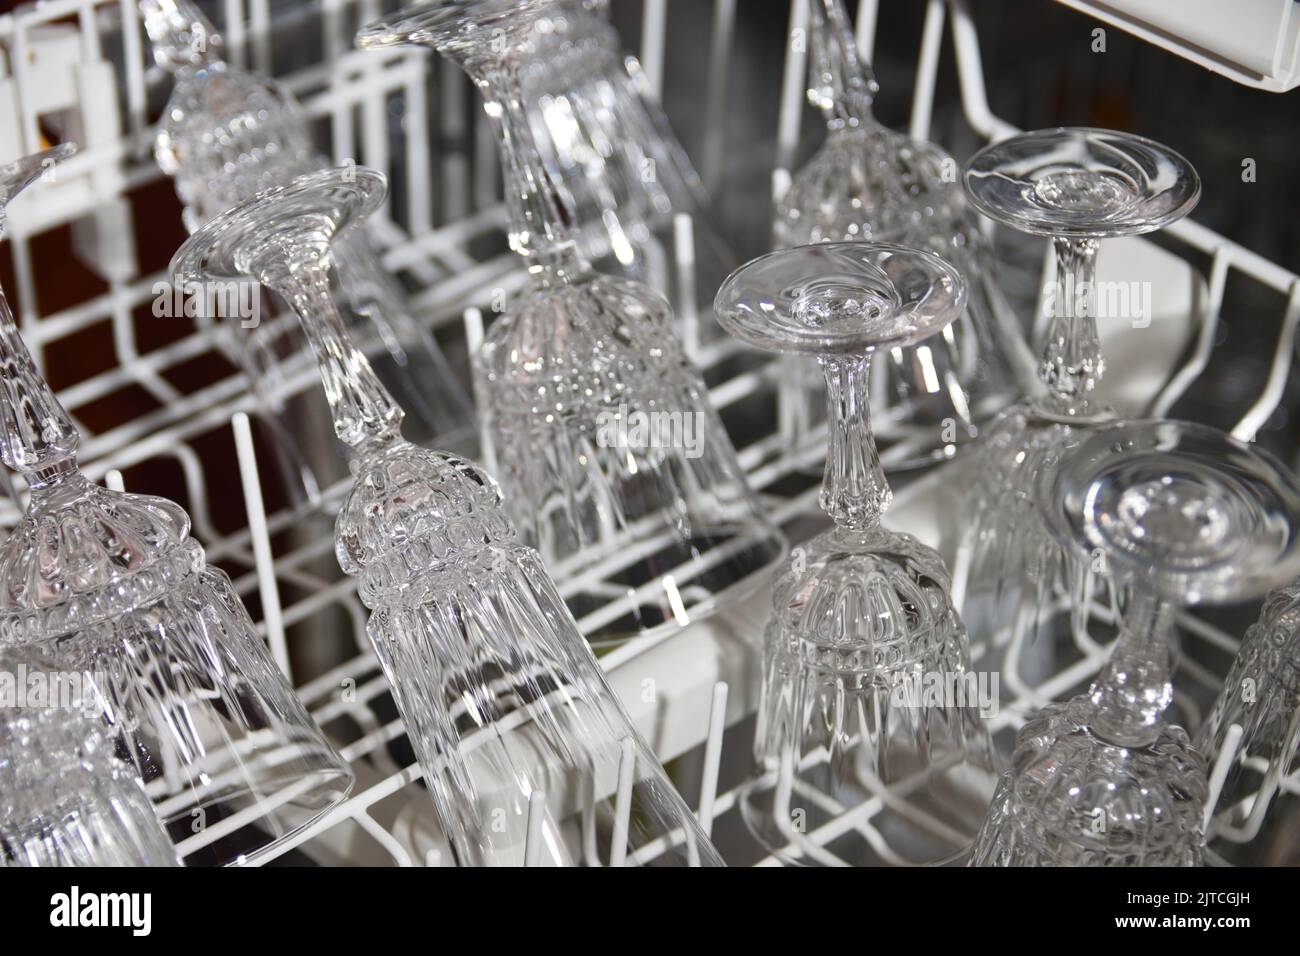 Image of some fine crystal glasses for wine and champagne in the tray of a dishwasher in which they have been cleaned Stock Photo